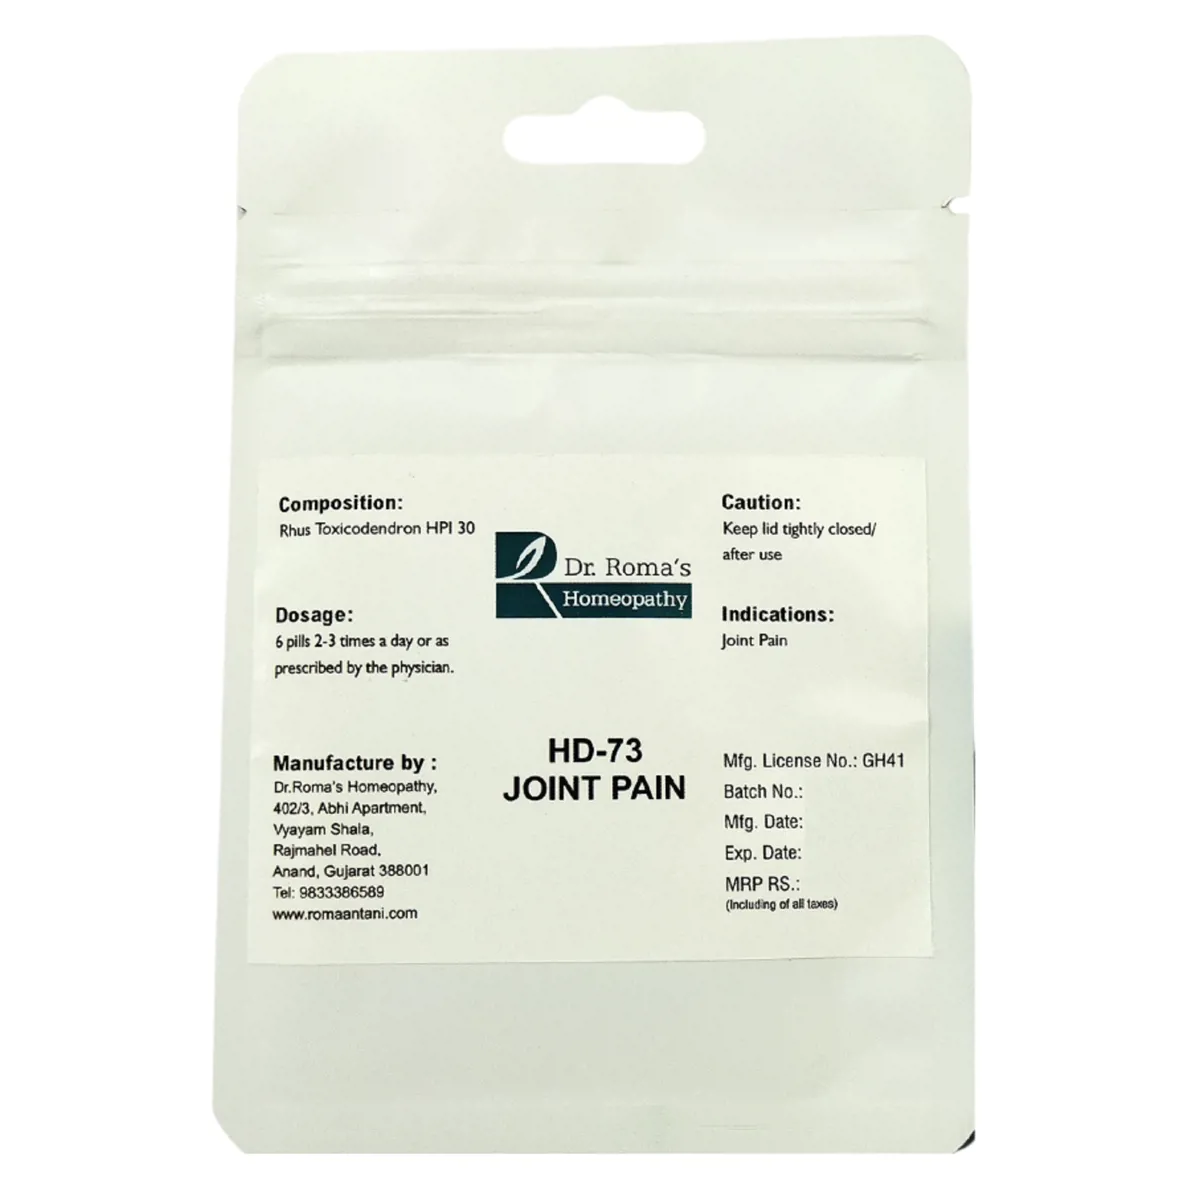 Dr Romas Homeopathy HD-73 Joint Pain 2 Bottles of 2 Dram 16g